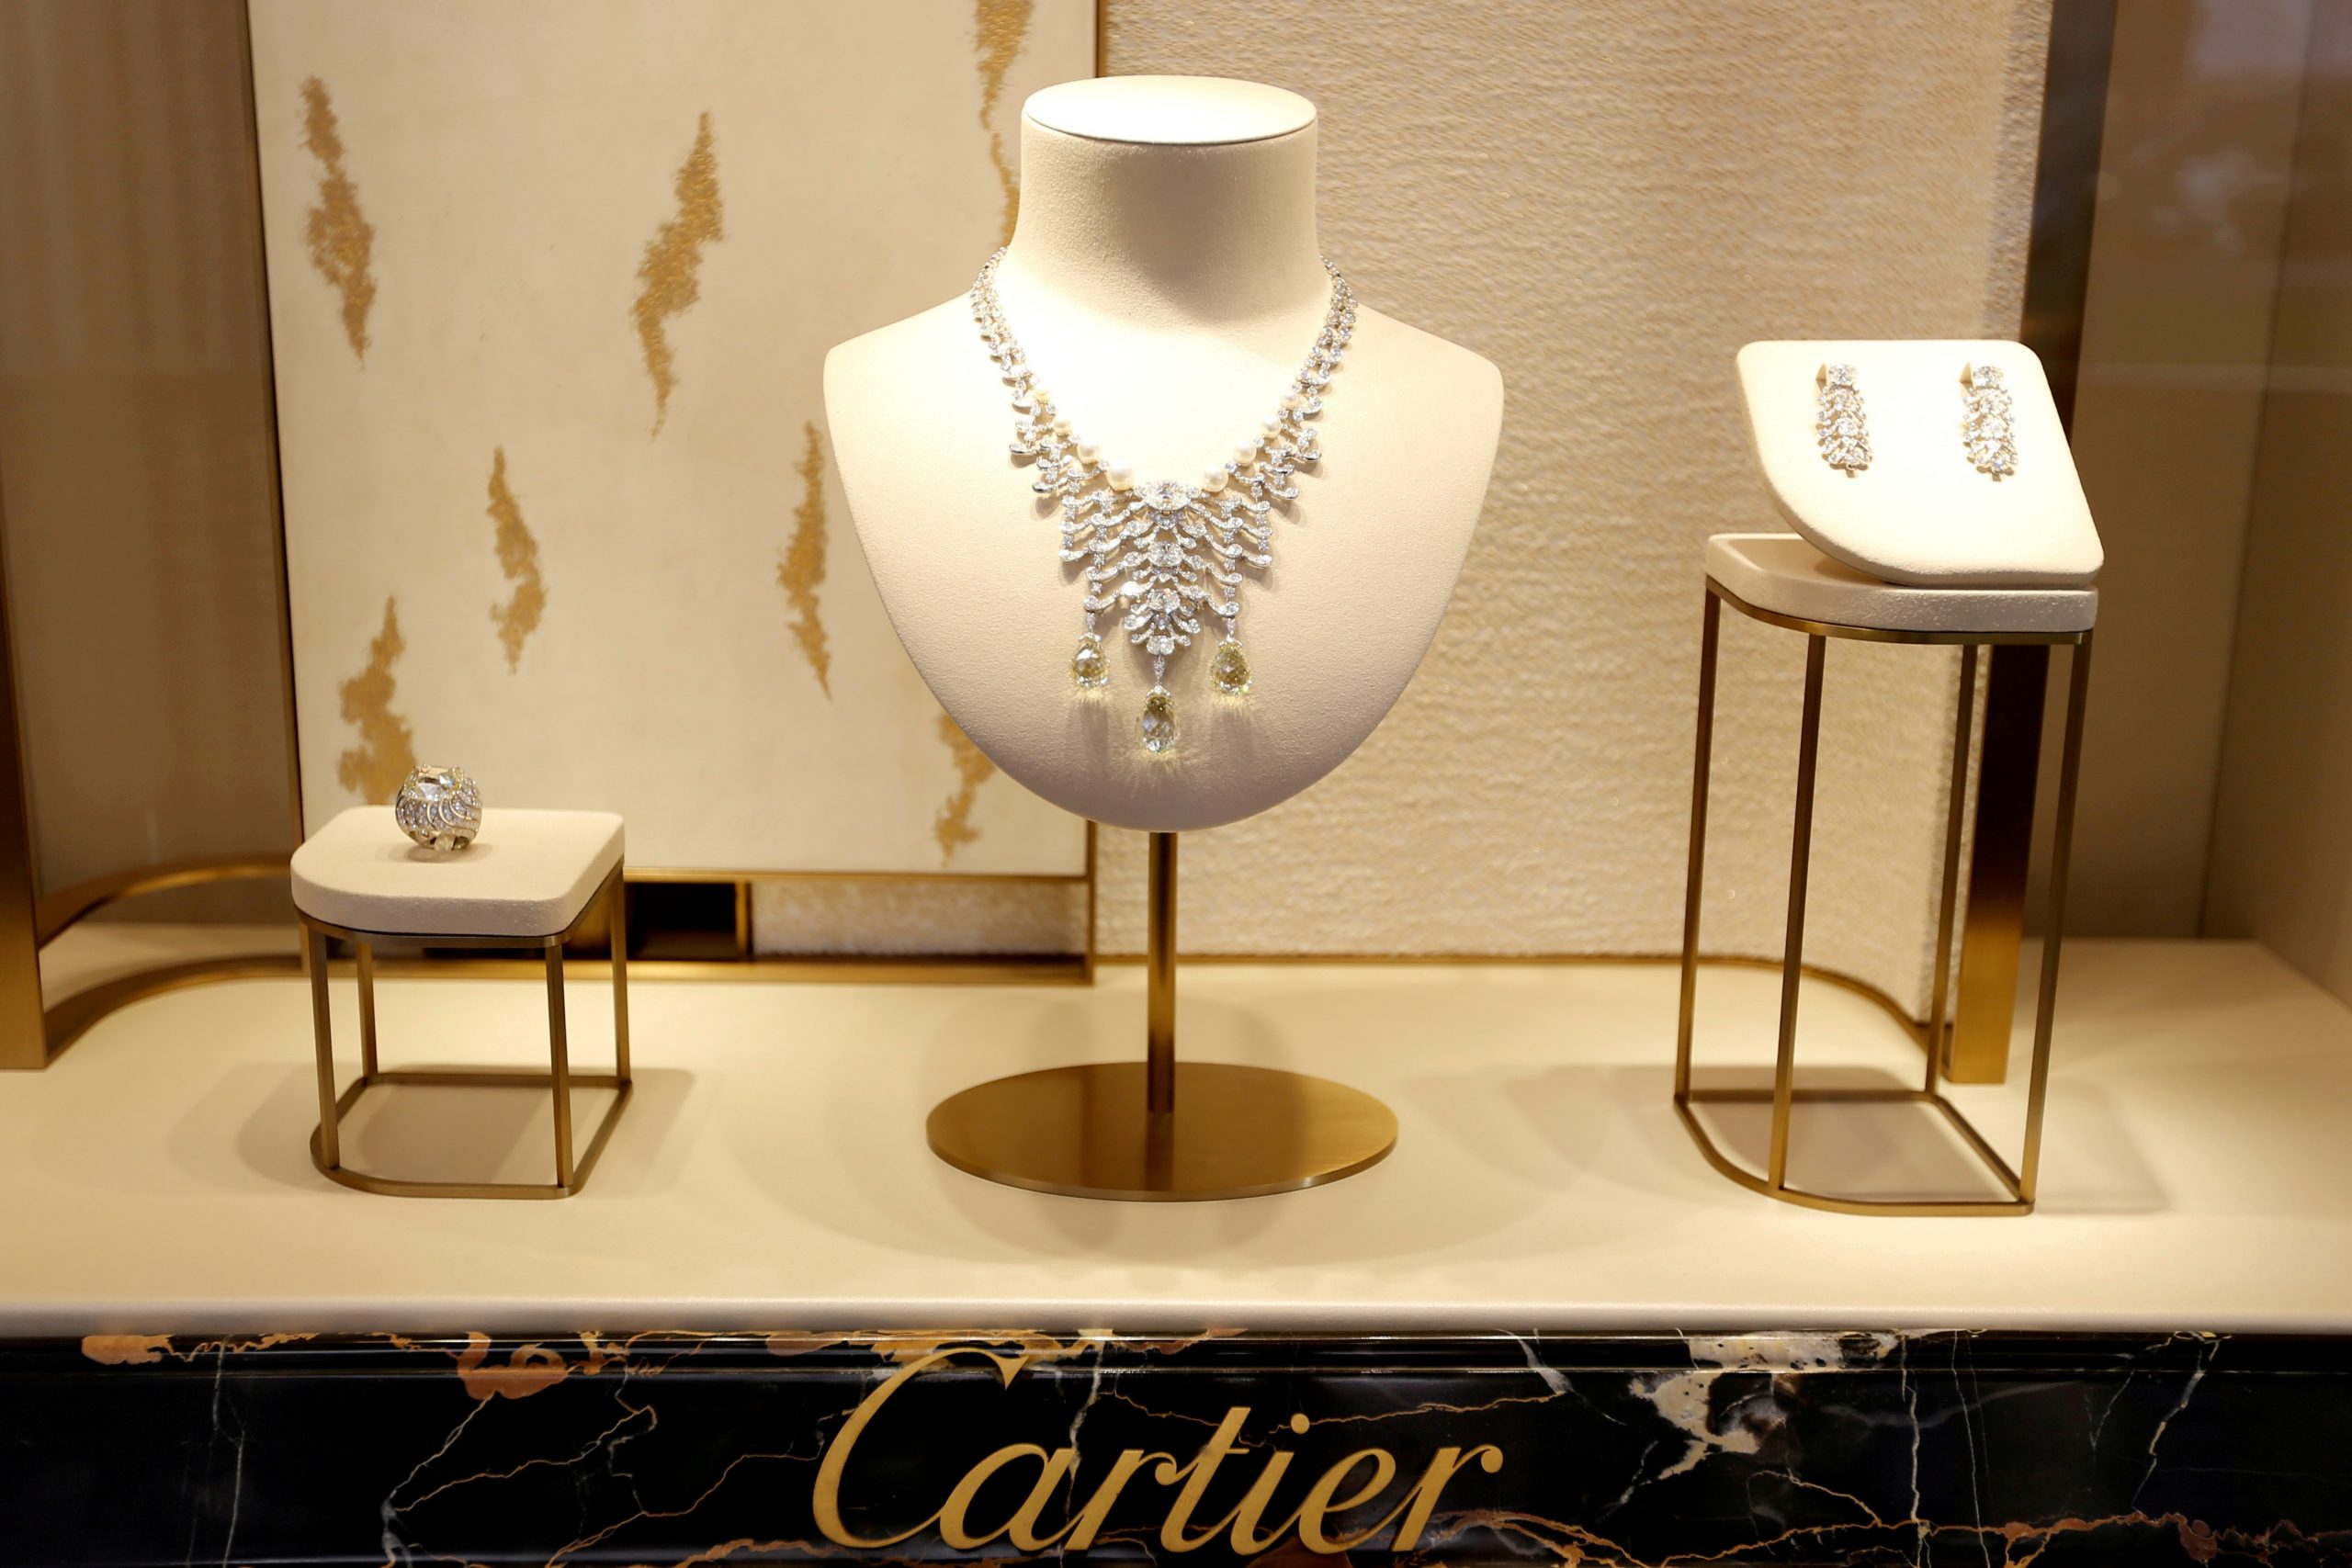 Americas and jewellery boost Richemont sales as pandemic hit wanes